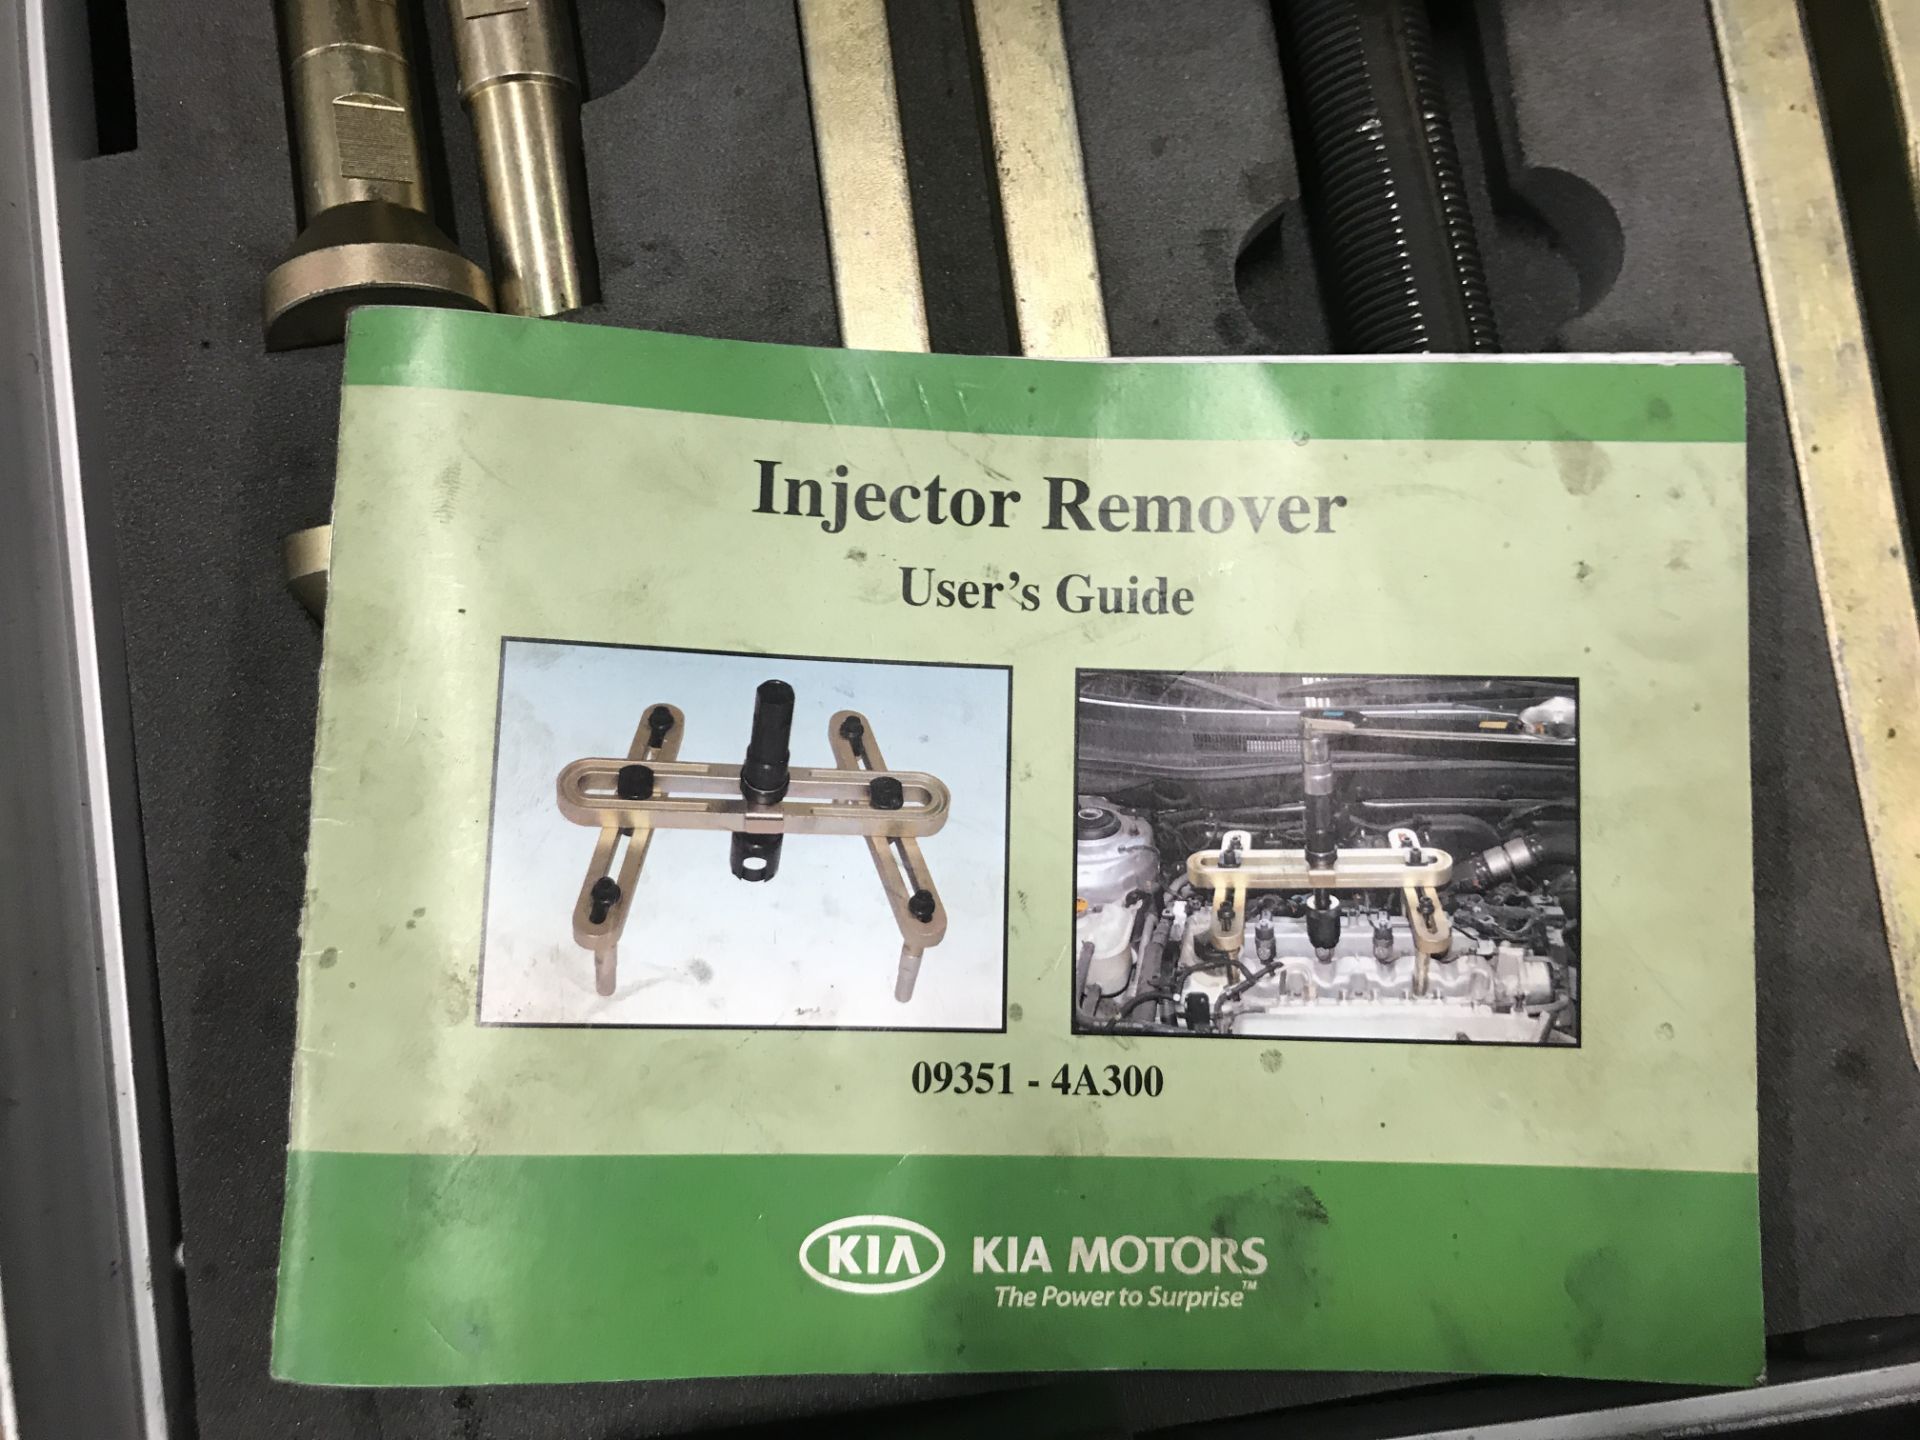 Kia Injector Remover - Image 2 of 2